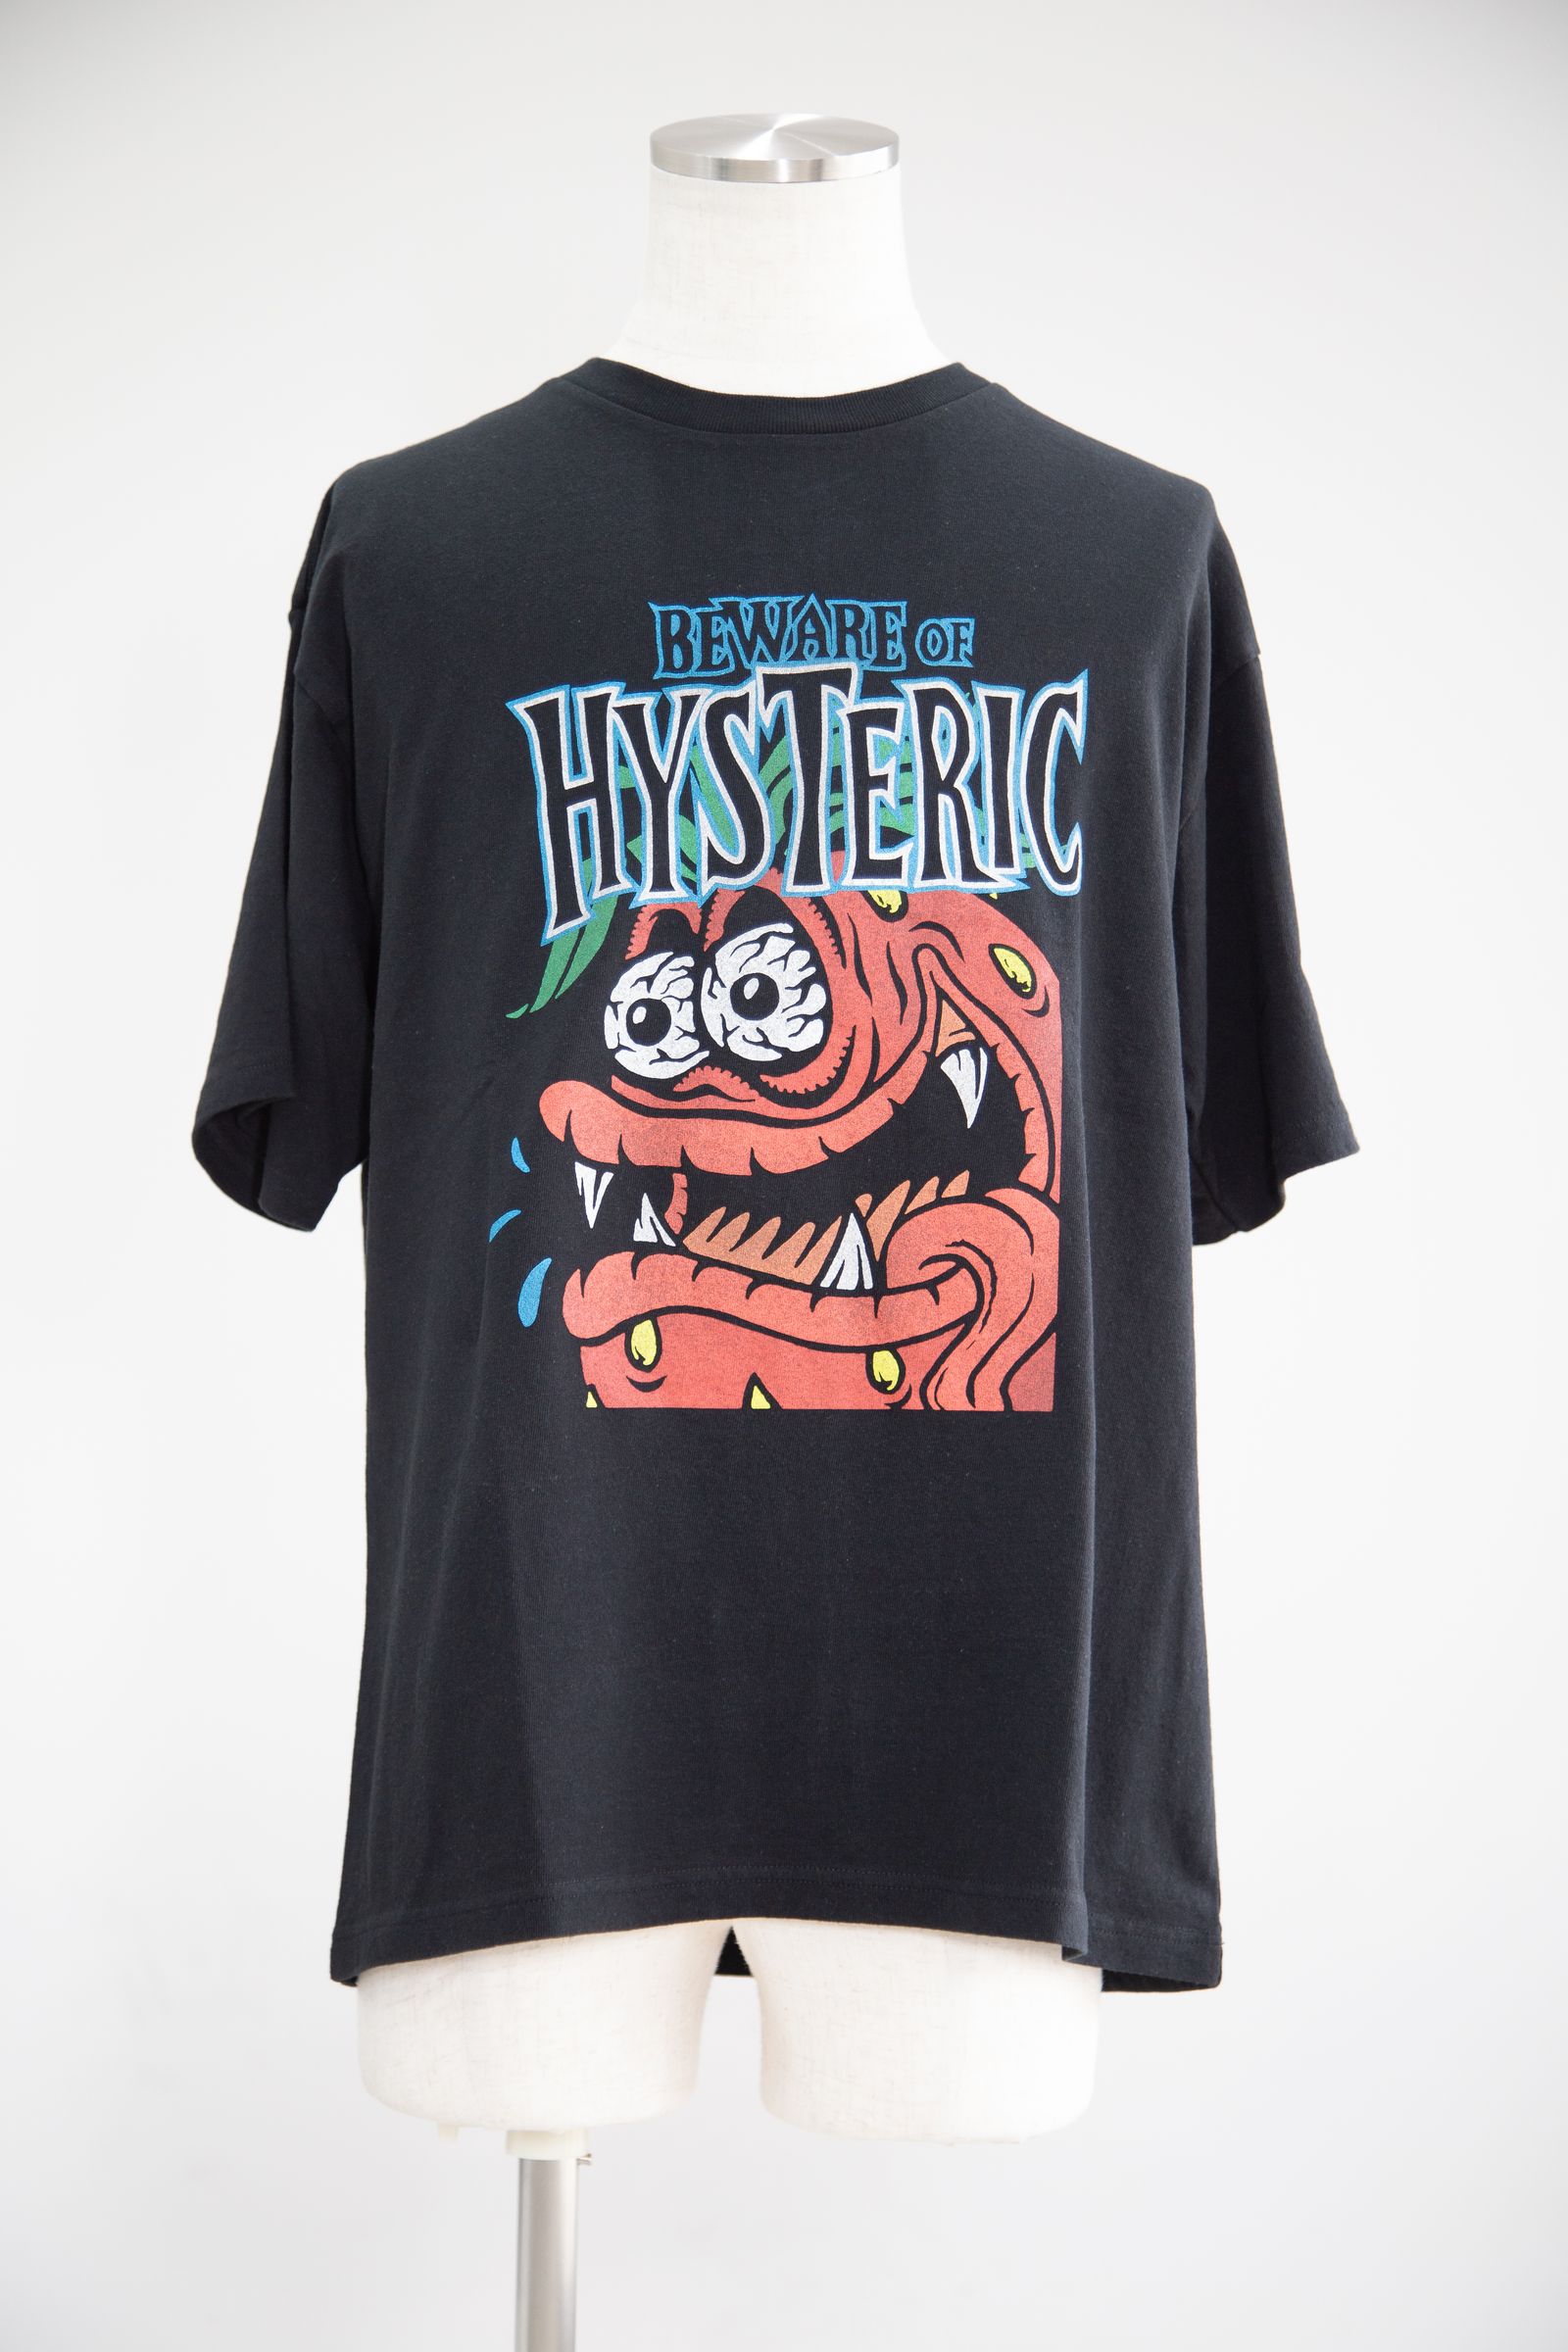 BEWEAR OF HYSTERIC Tシャツ